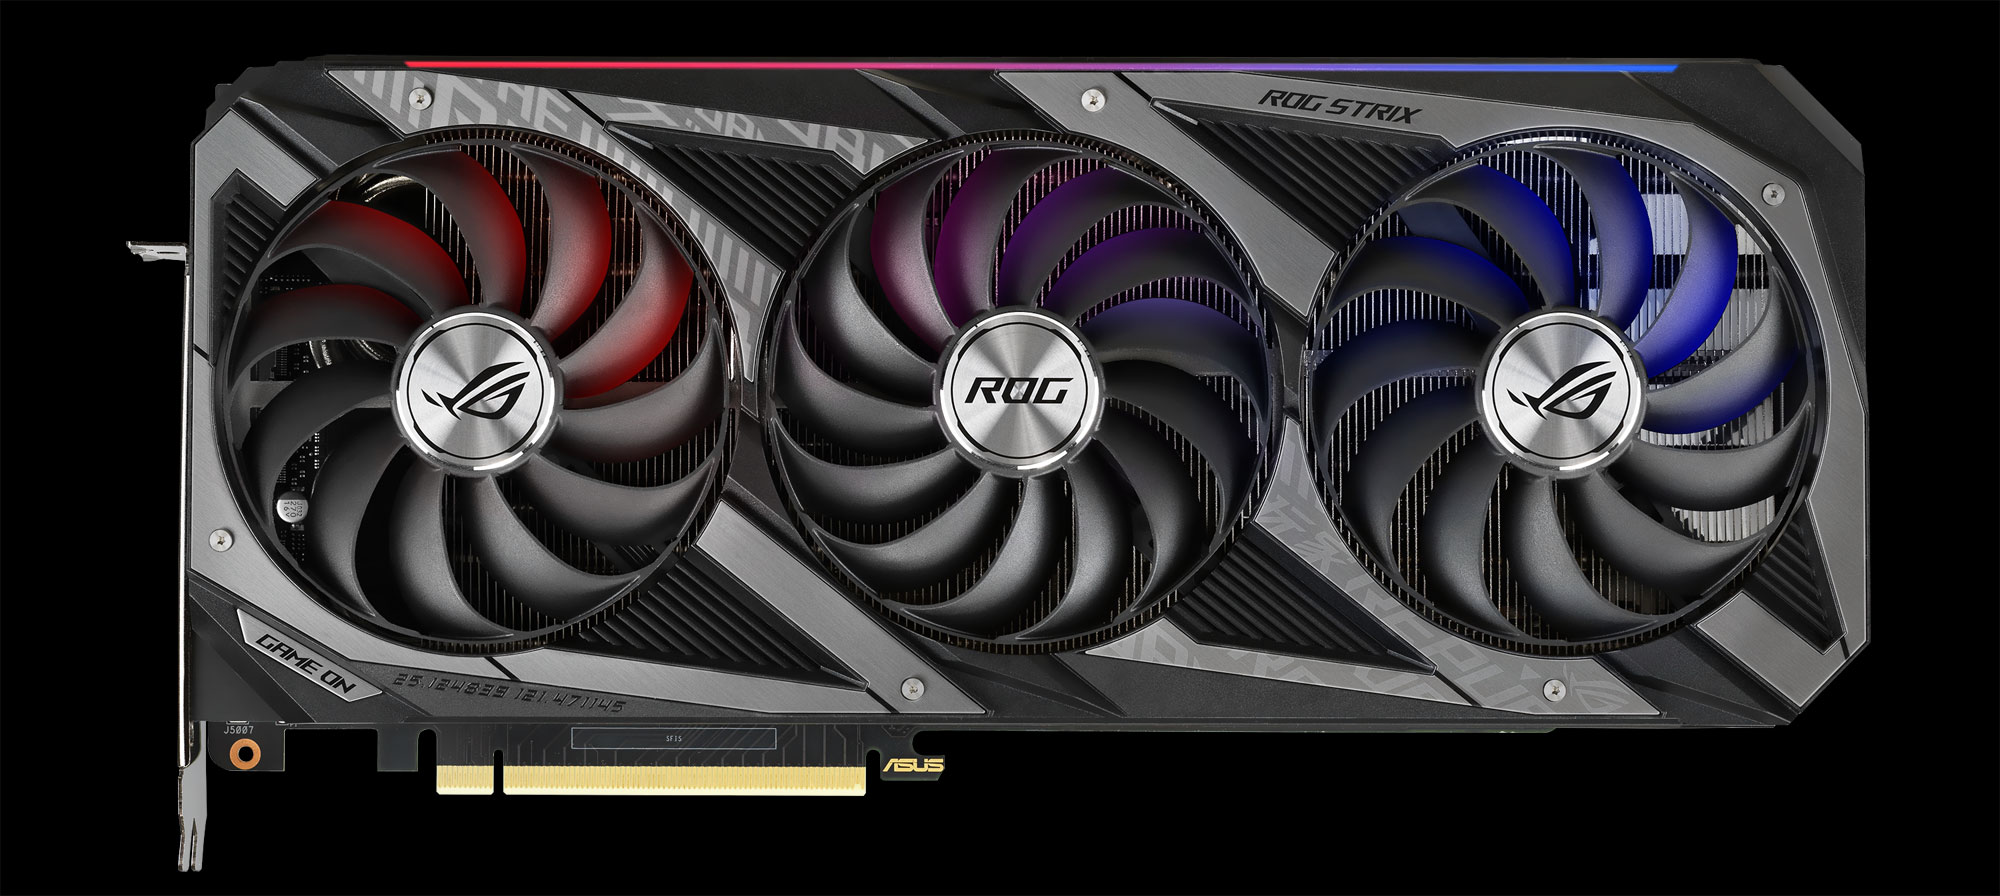 ROG Strix vs TUF vs Dual and beyond: Which ASUS graphics card is right for  you?